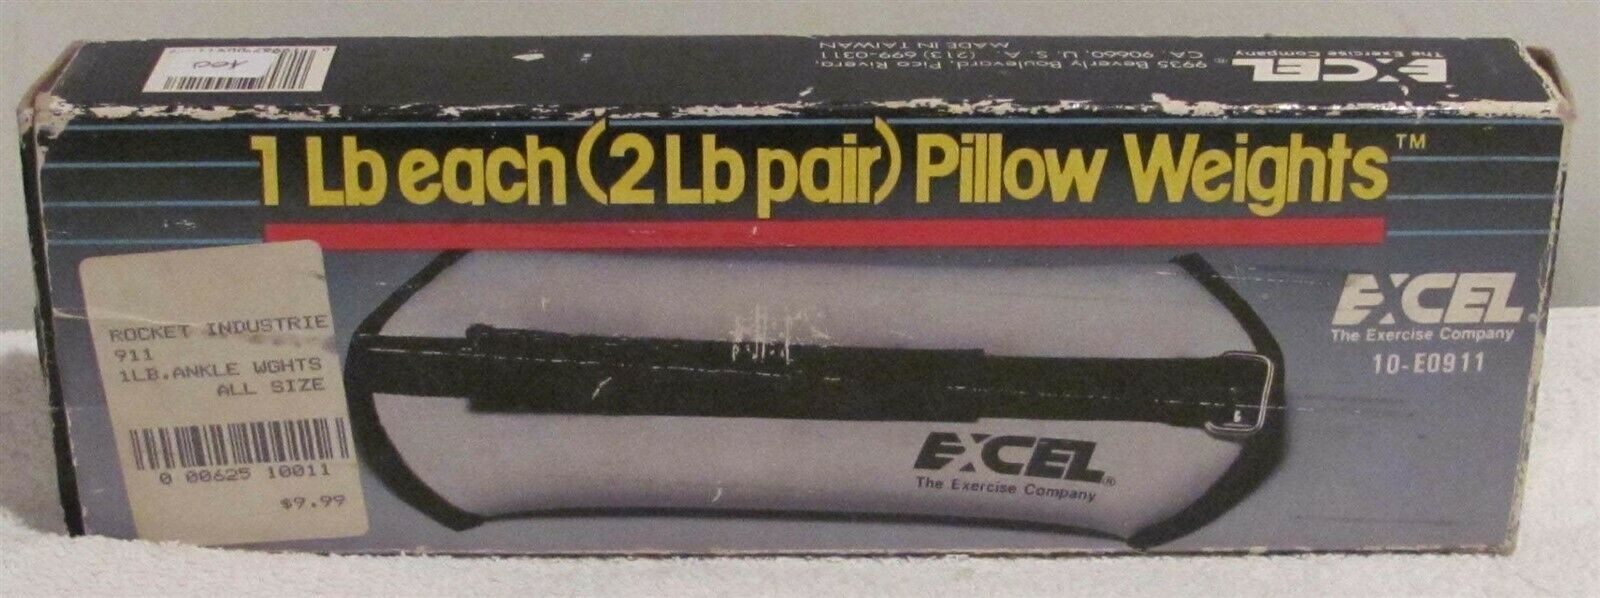 1-pair Excel 1 Lb. Nylon Wrist (or) Ankle "pillow" Weights (new From 1989!!)